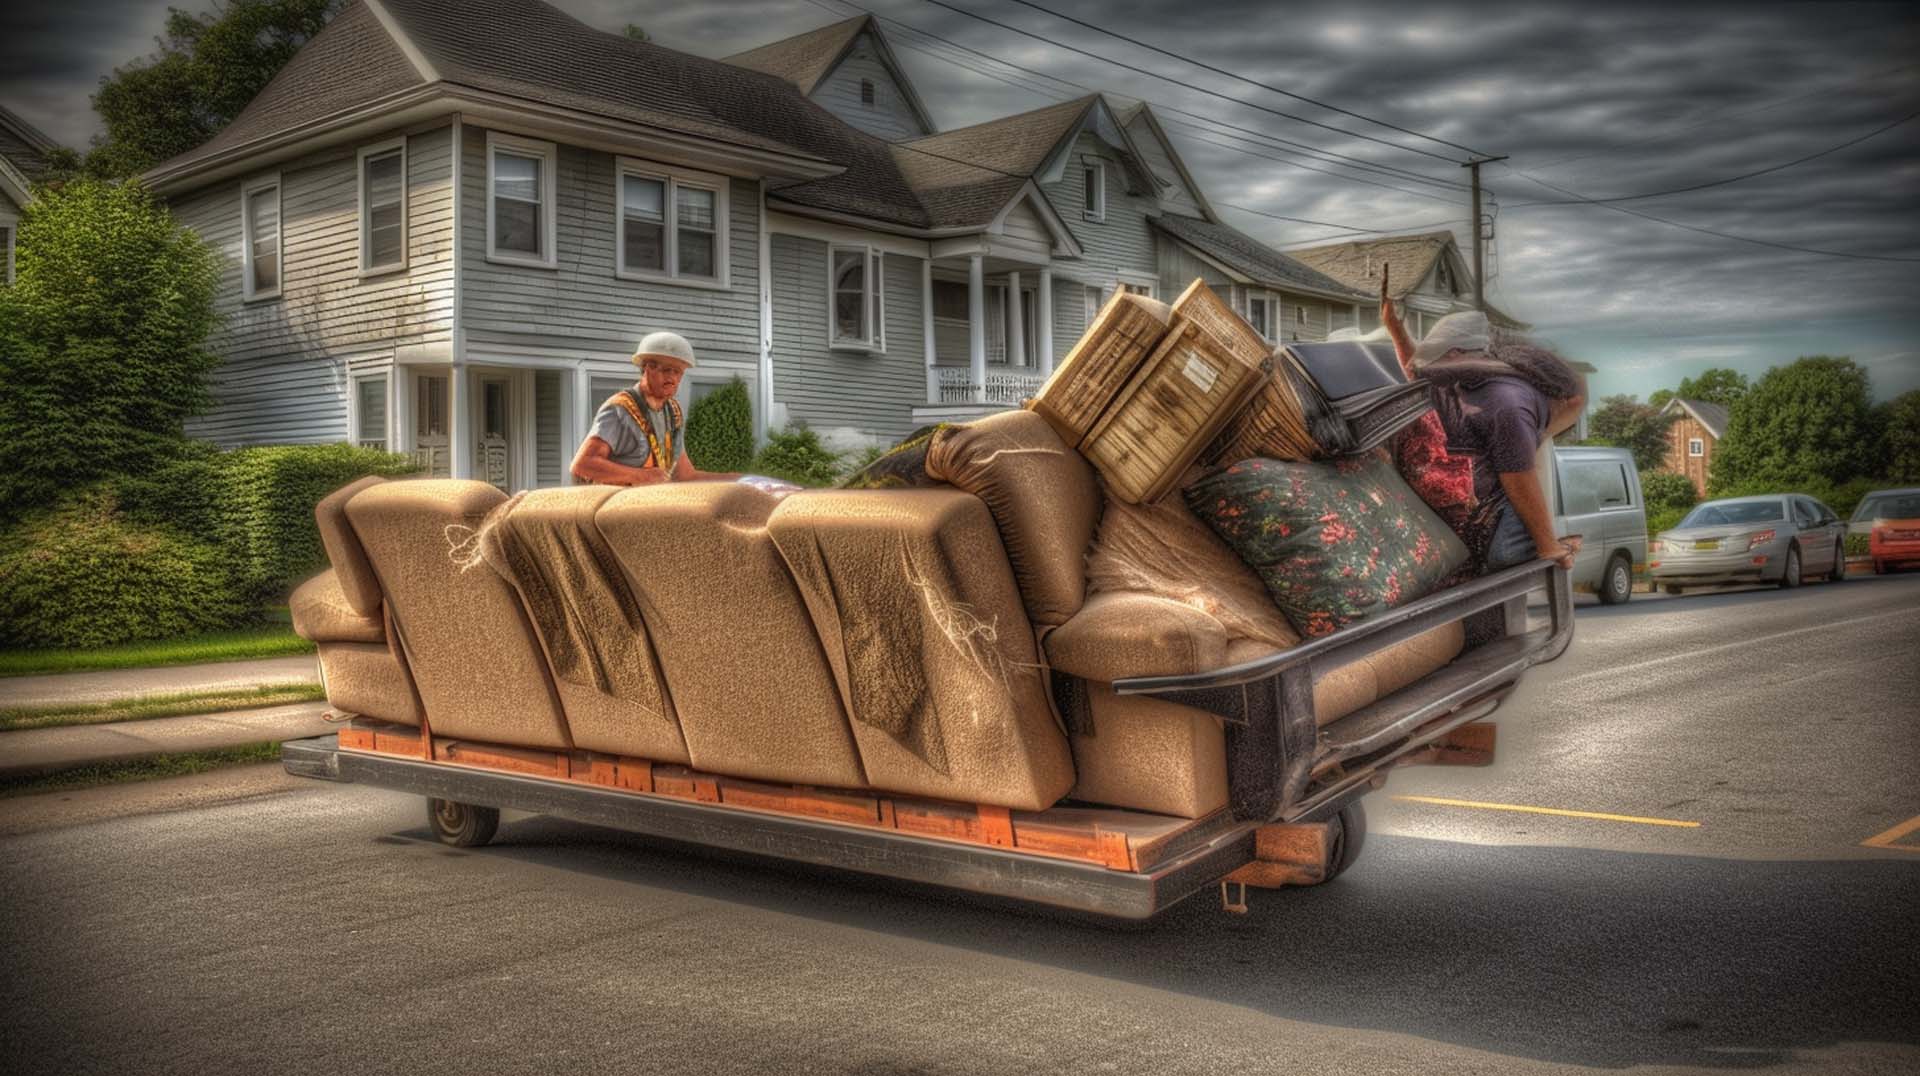 How to Find a Reputable Junk Removal Company in Saint-Hyacinthe, Quebec